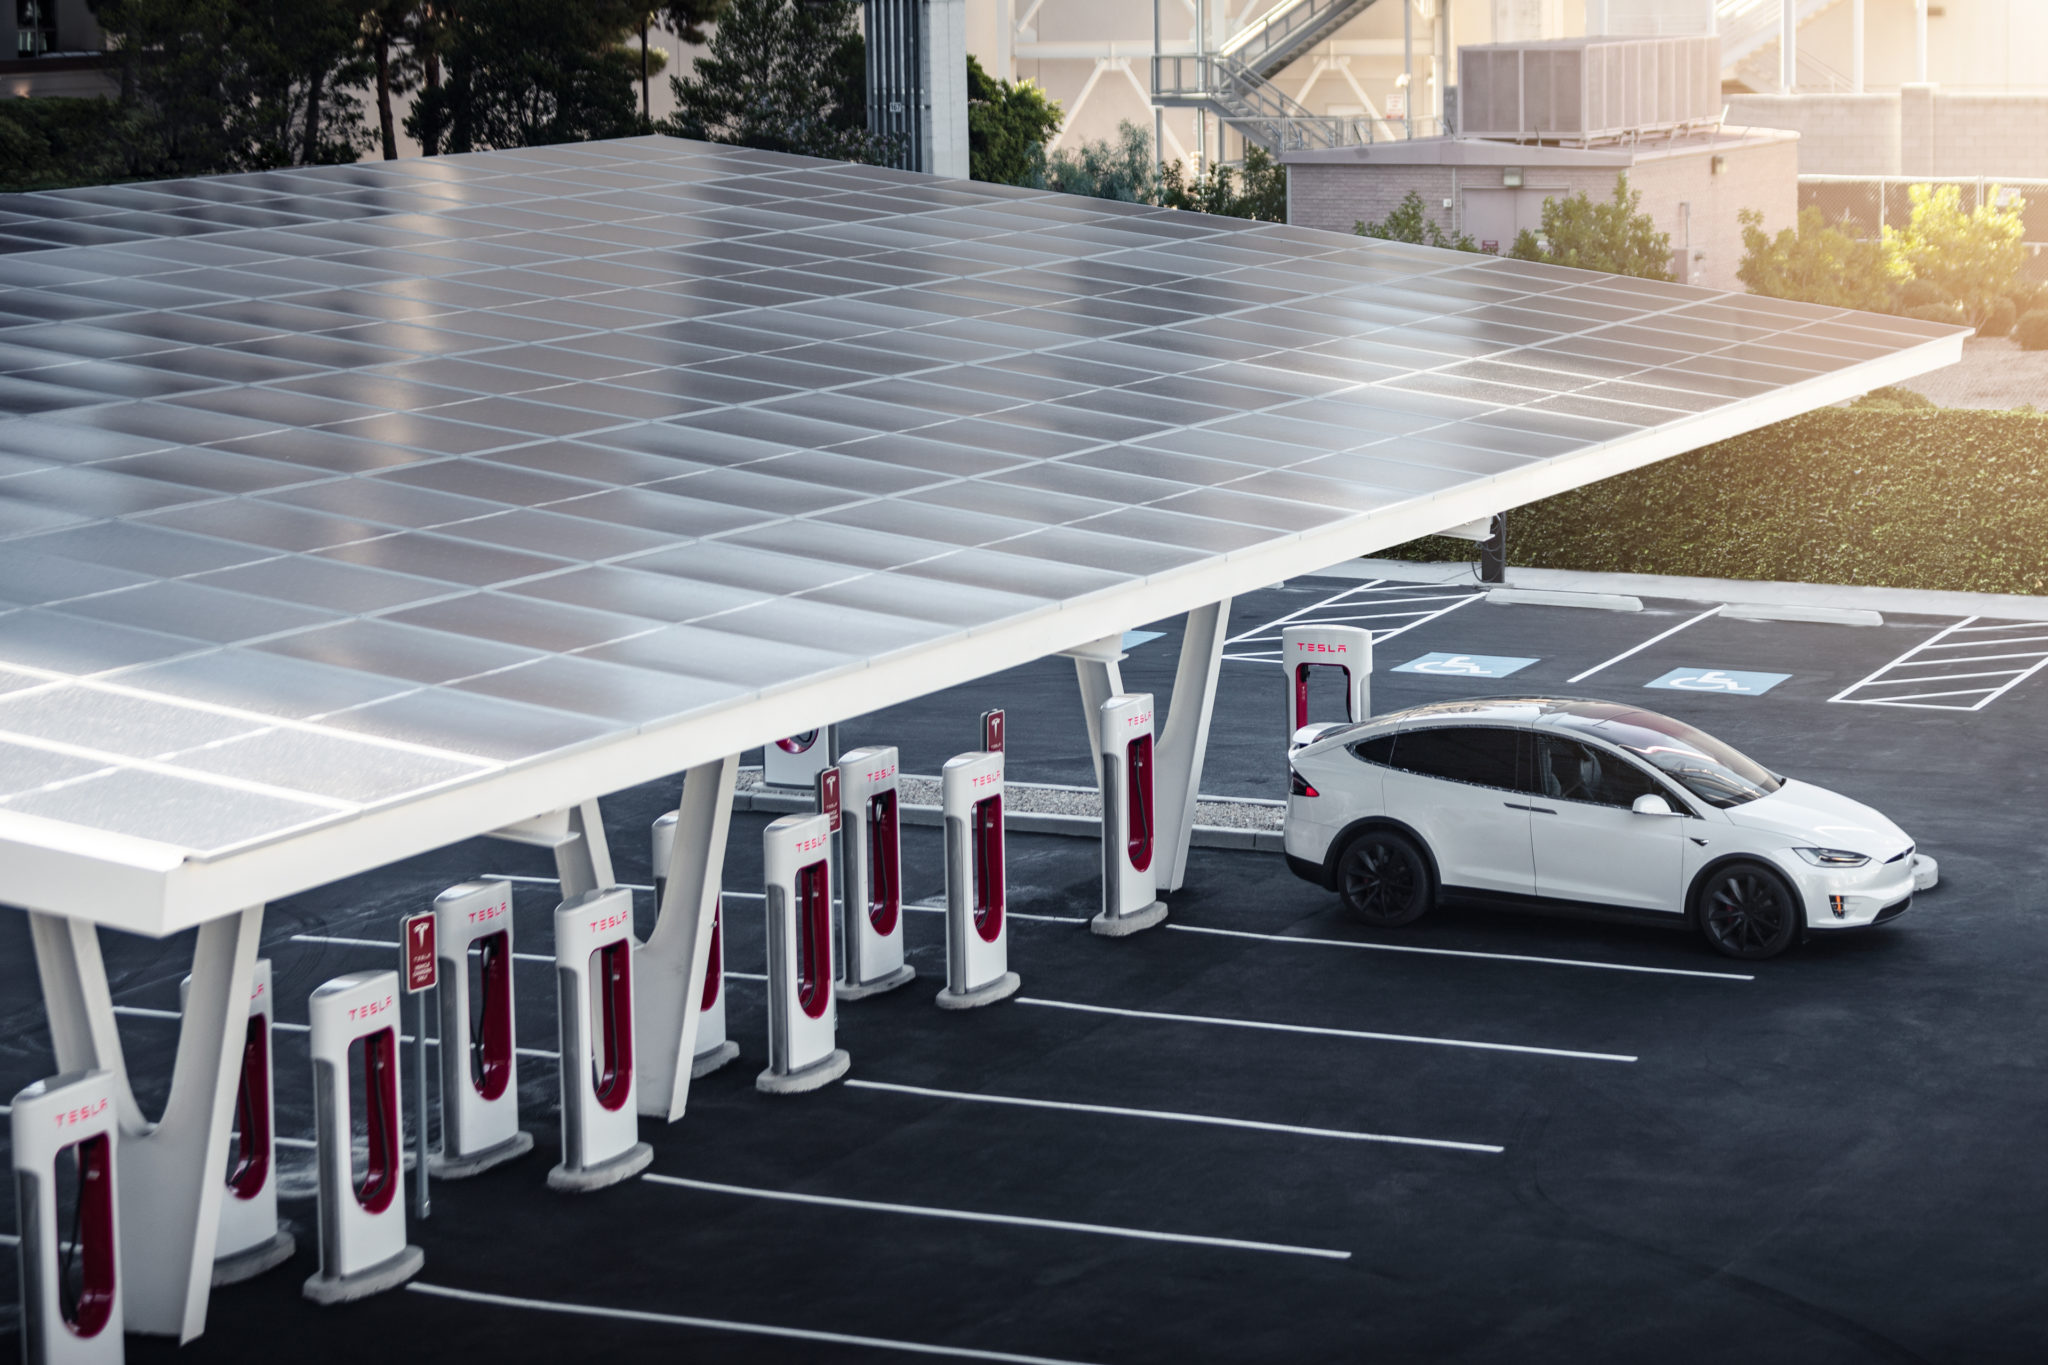 Tesla Opens 72-Stall Supercharger Station in Shanghai - The Next Avenue